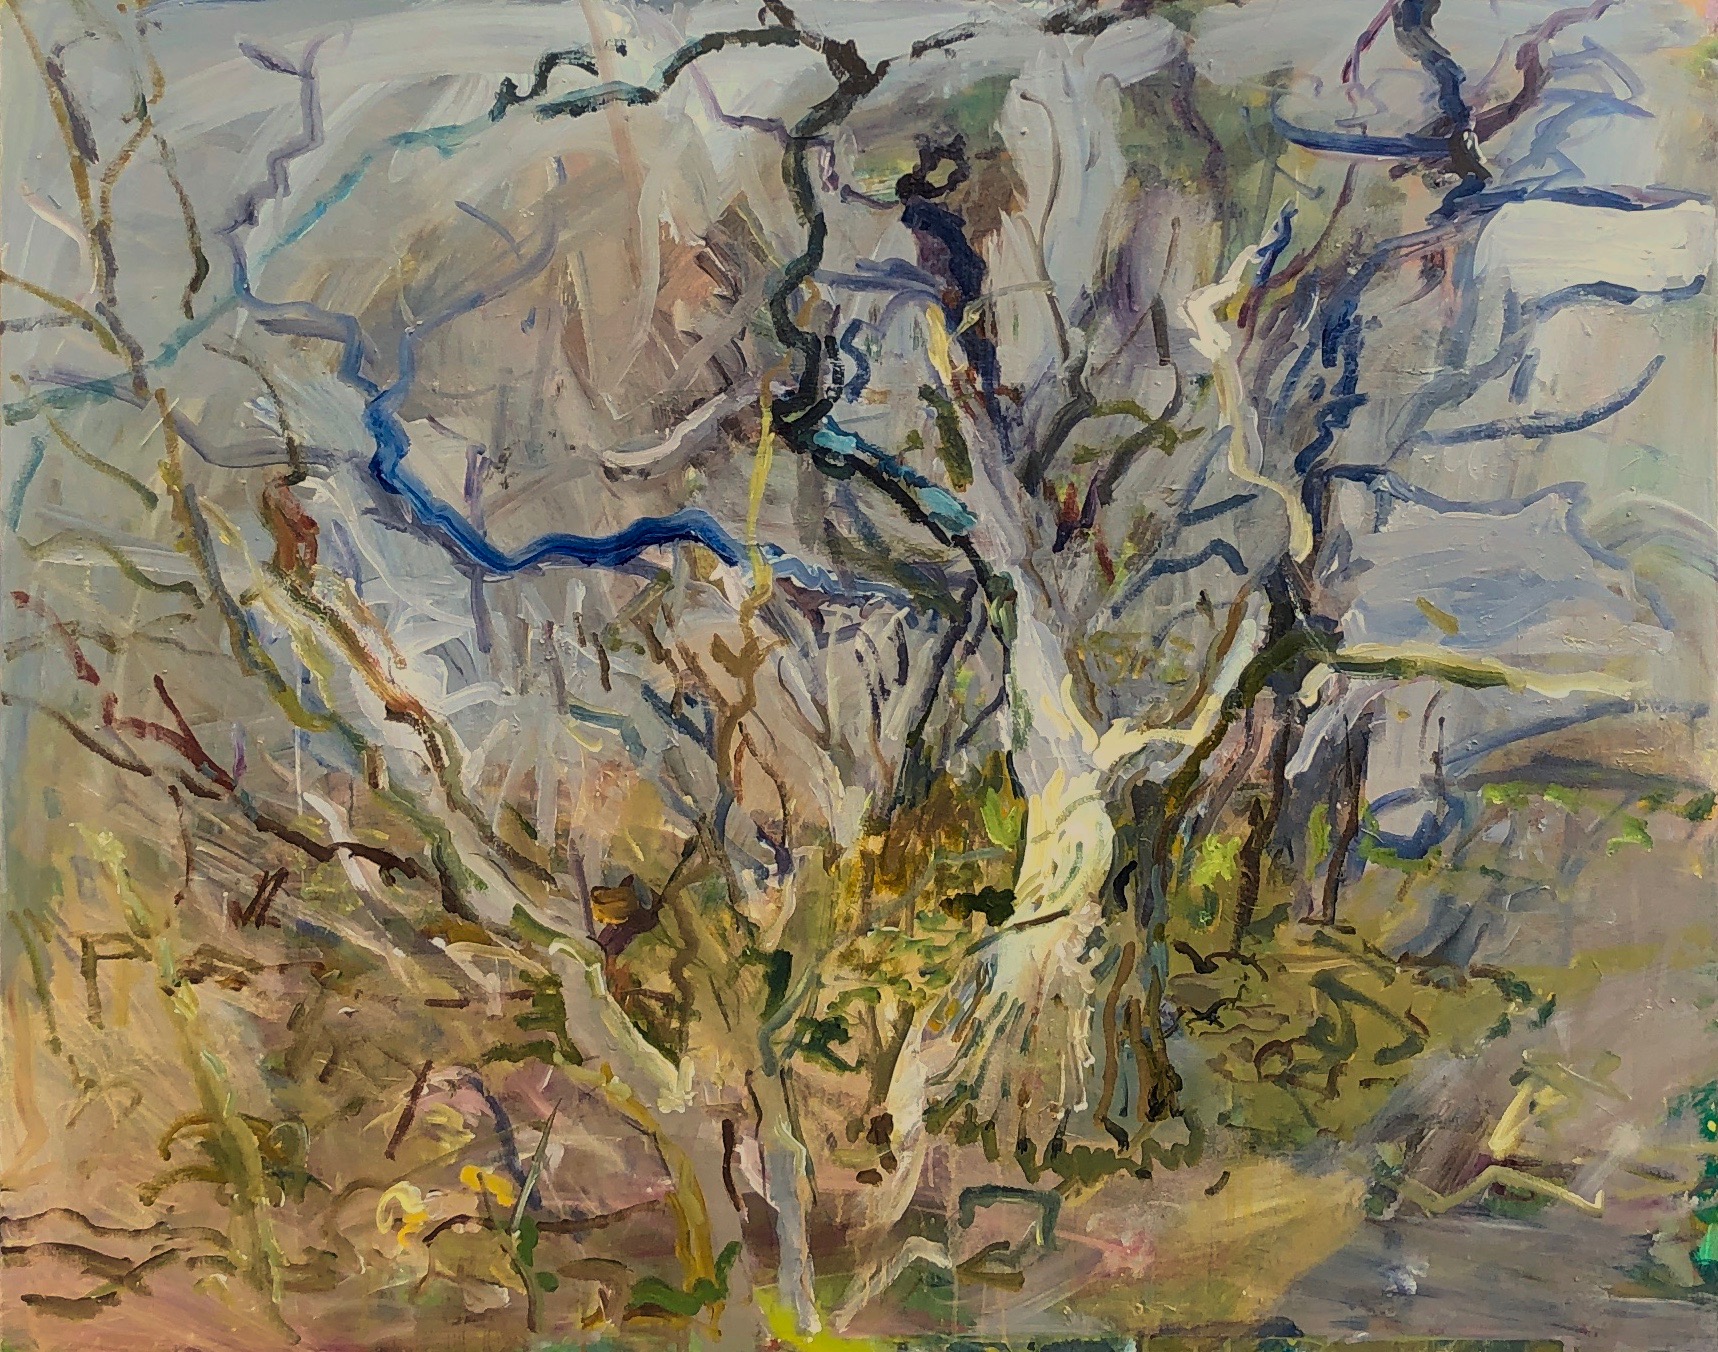  Tree - Early Spring Acrylic on Canvas 48” x 60”     